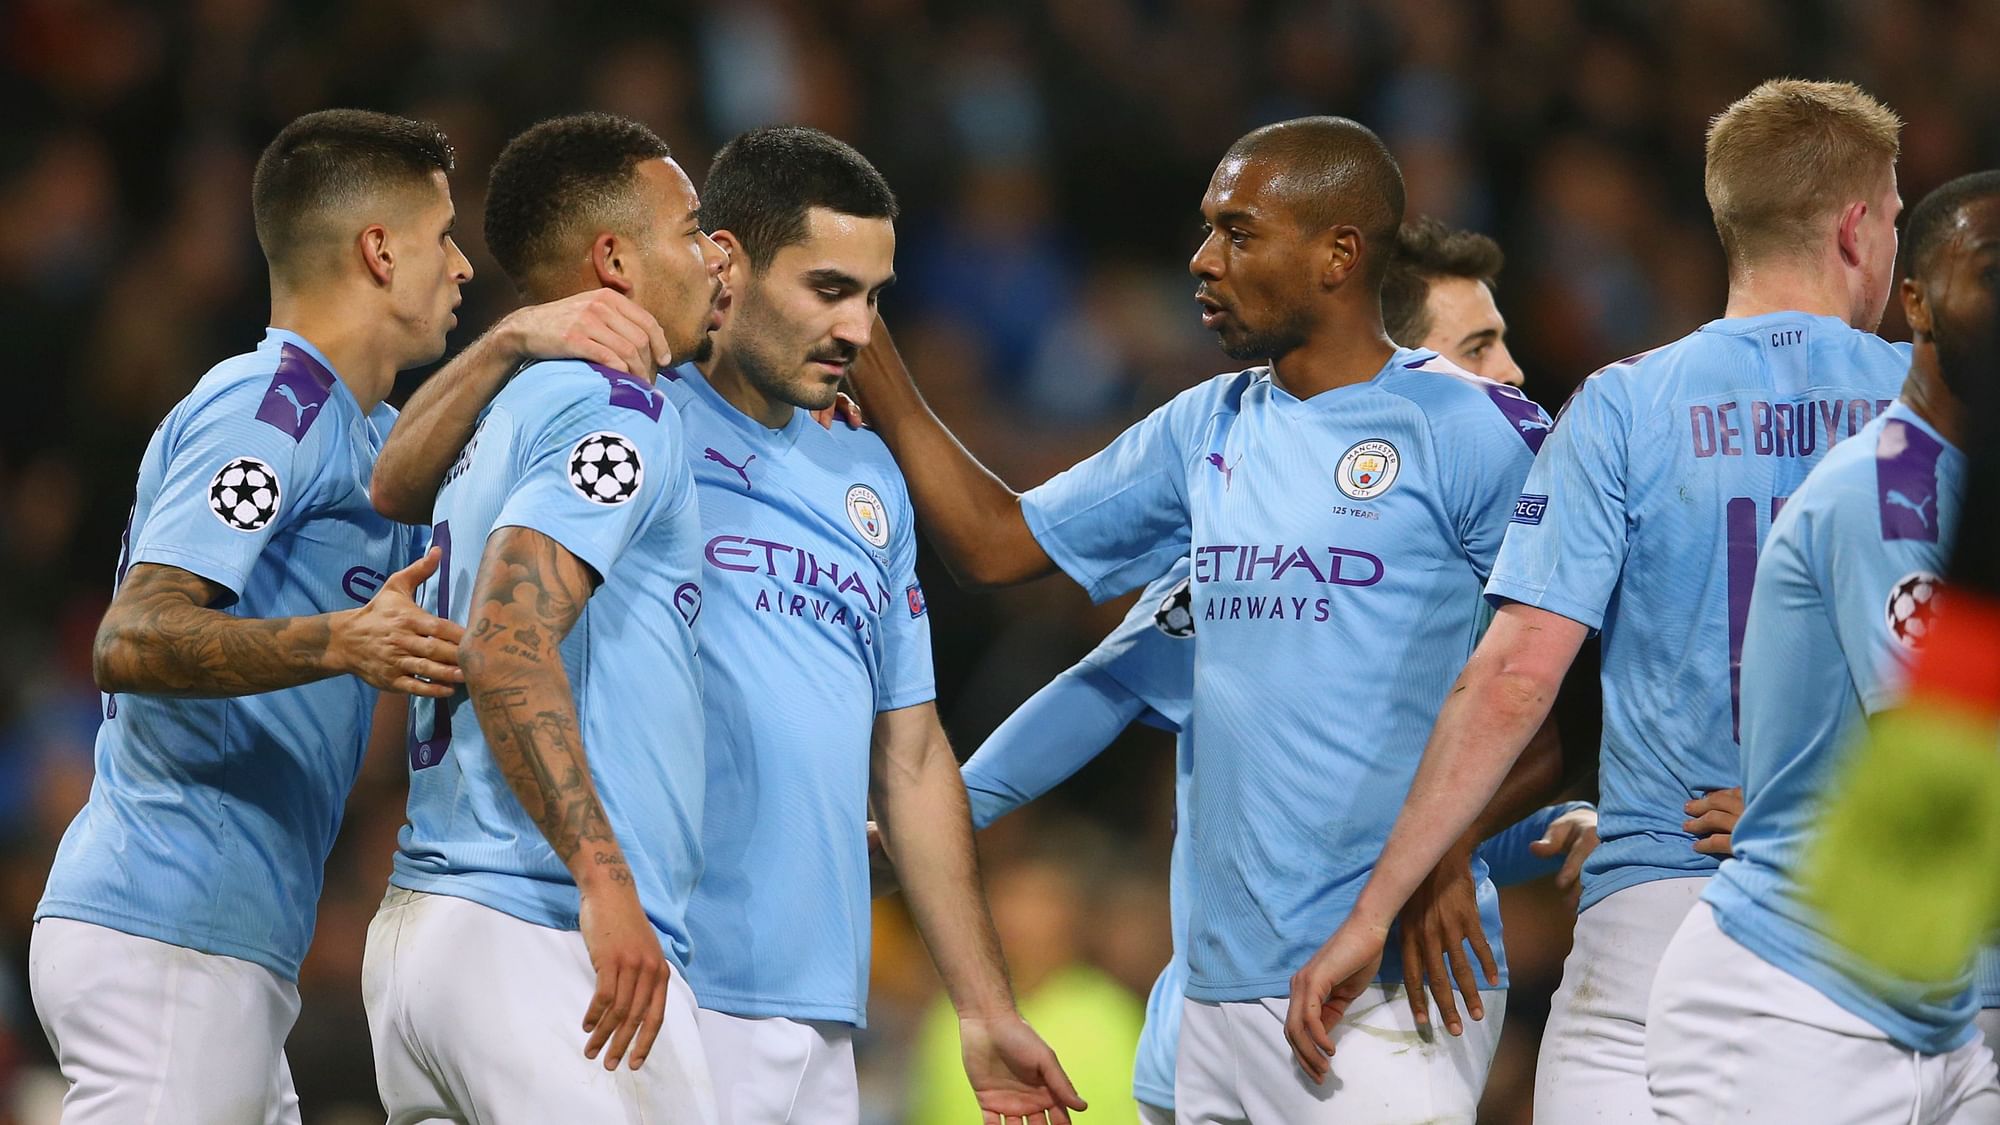 Manchester City qualified for the knockout stage of the Champions League as a group winner with a game to spare.